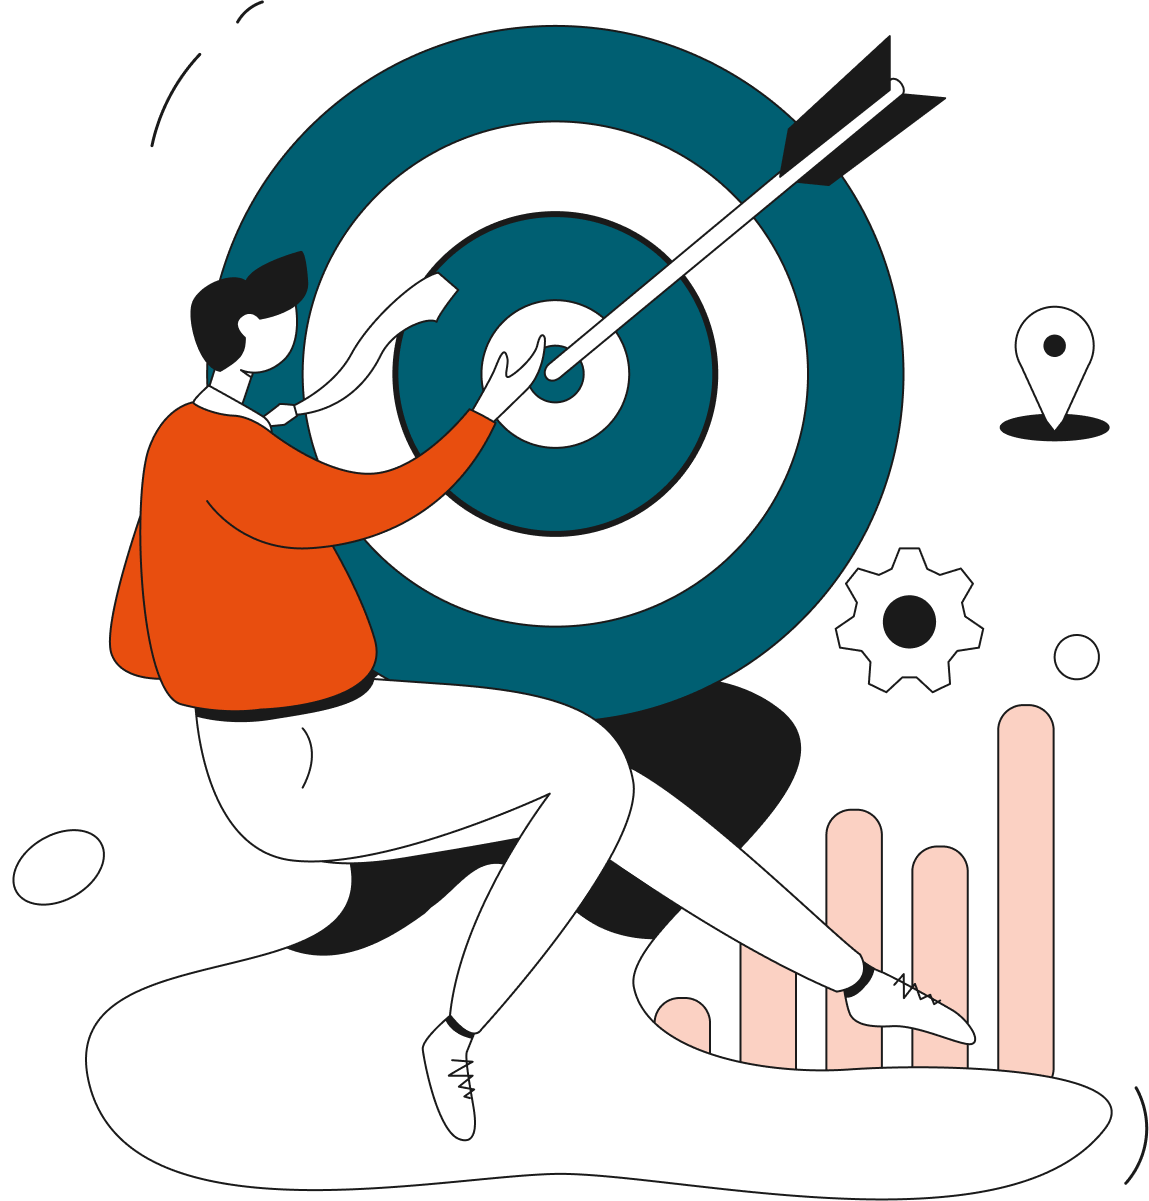 Illustration showing a person removing a dart from the bullseye position on a dartboard.